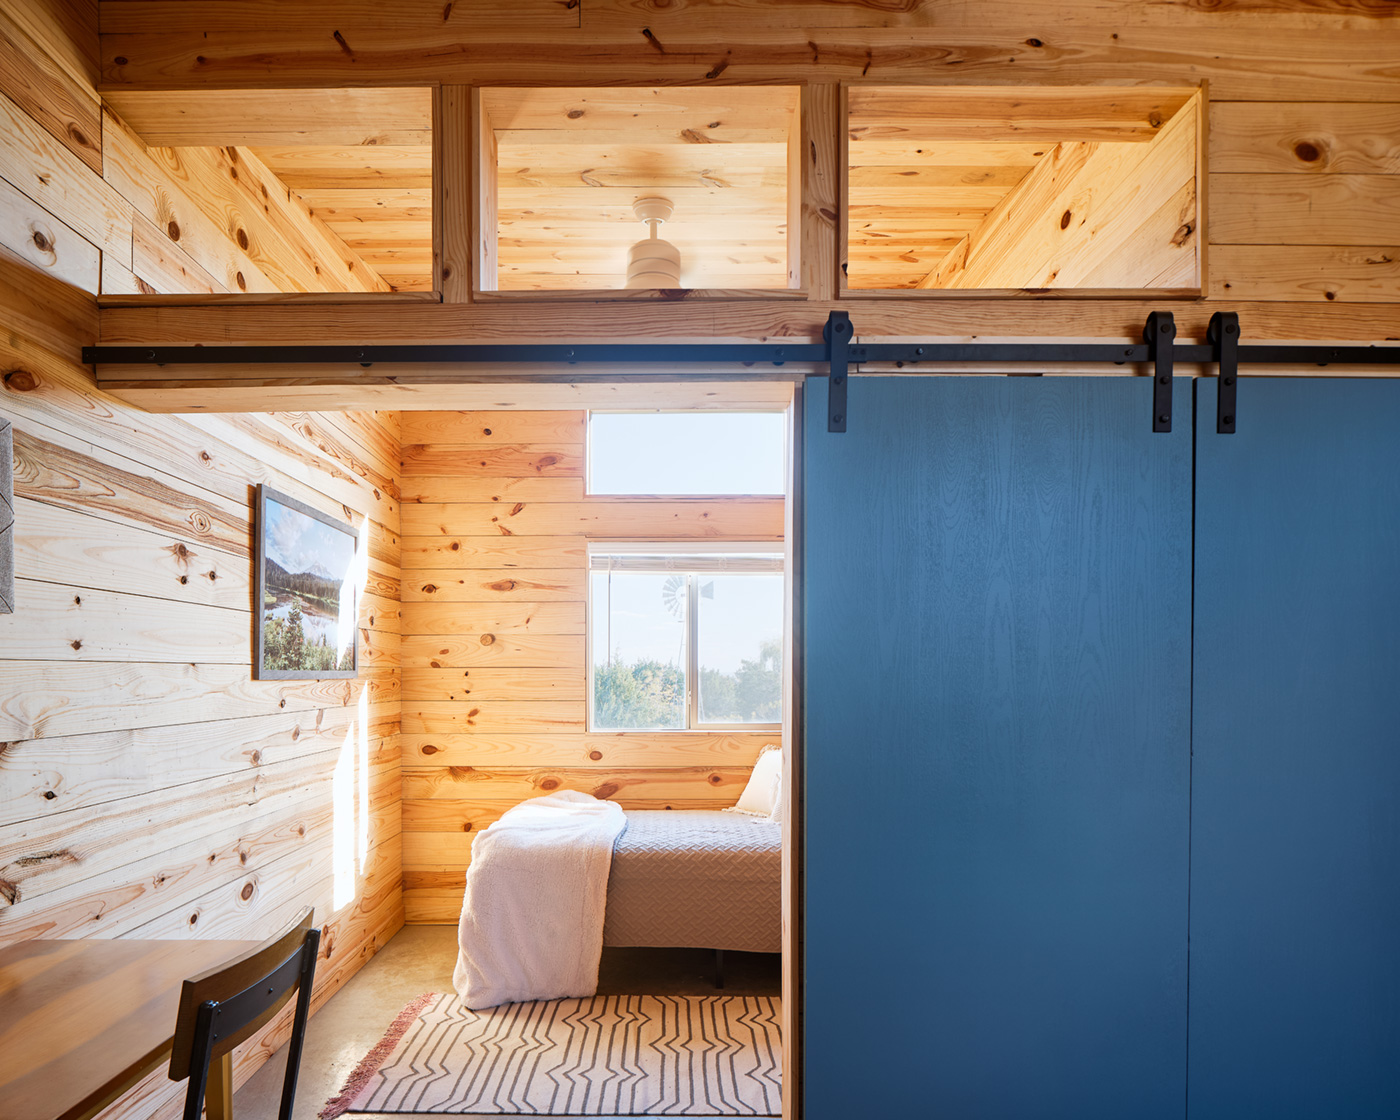 A small wooden bedroom with a sliding door.